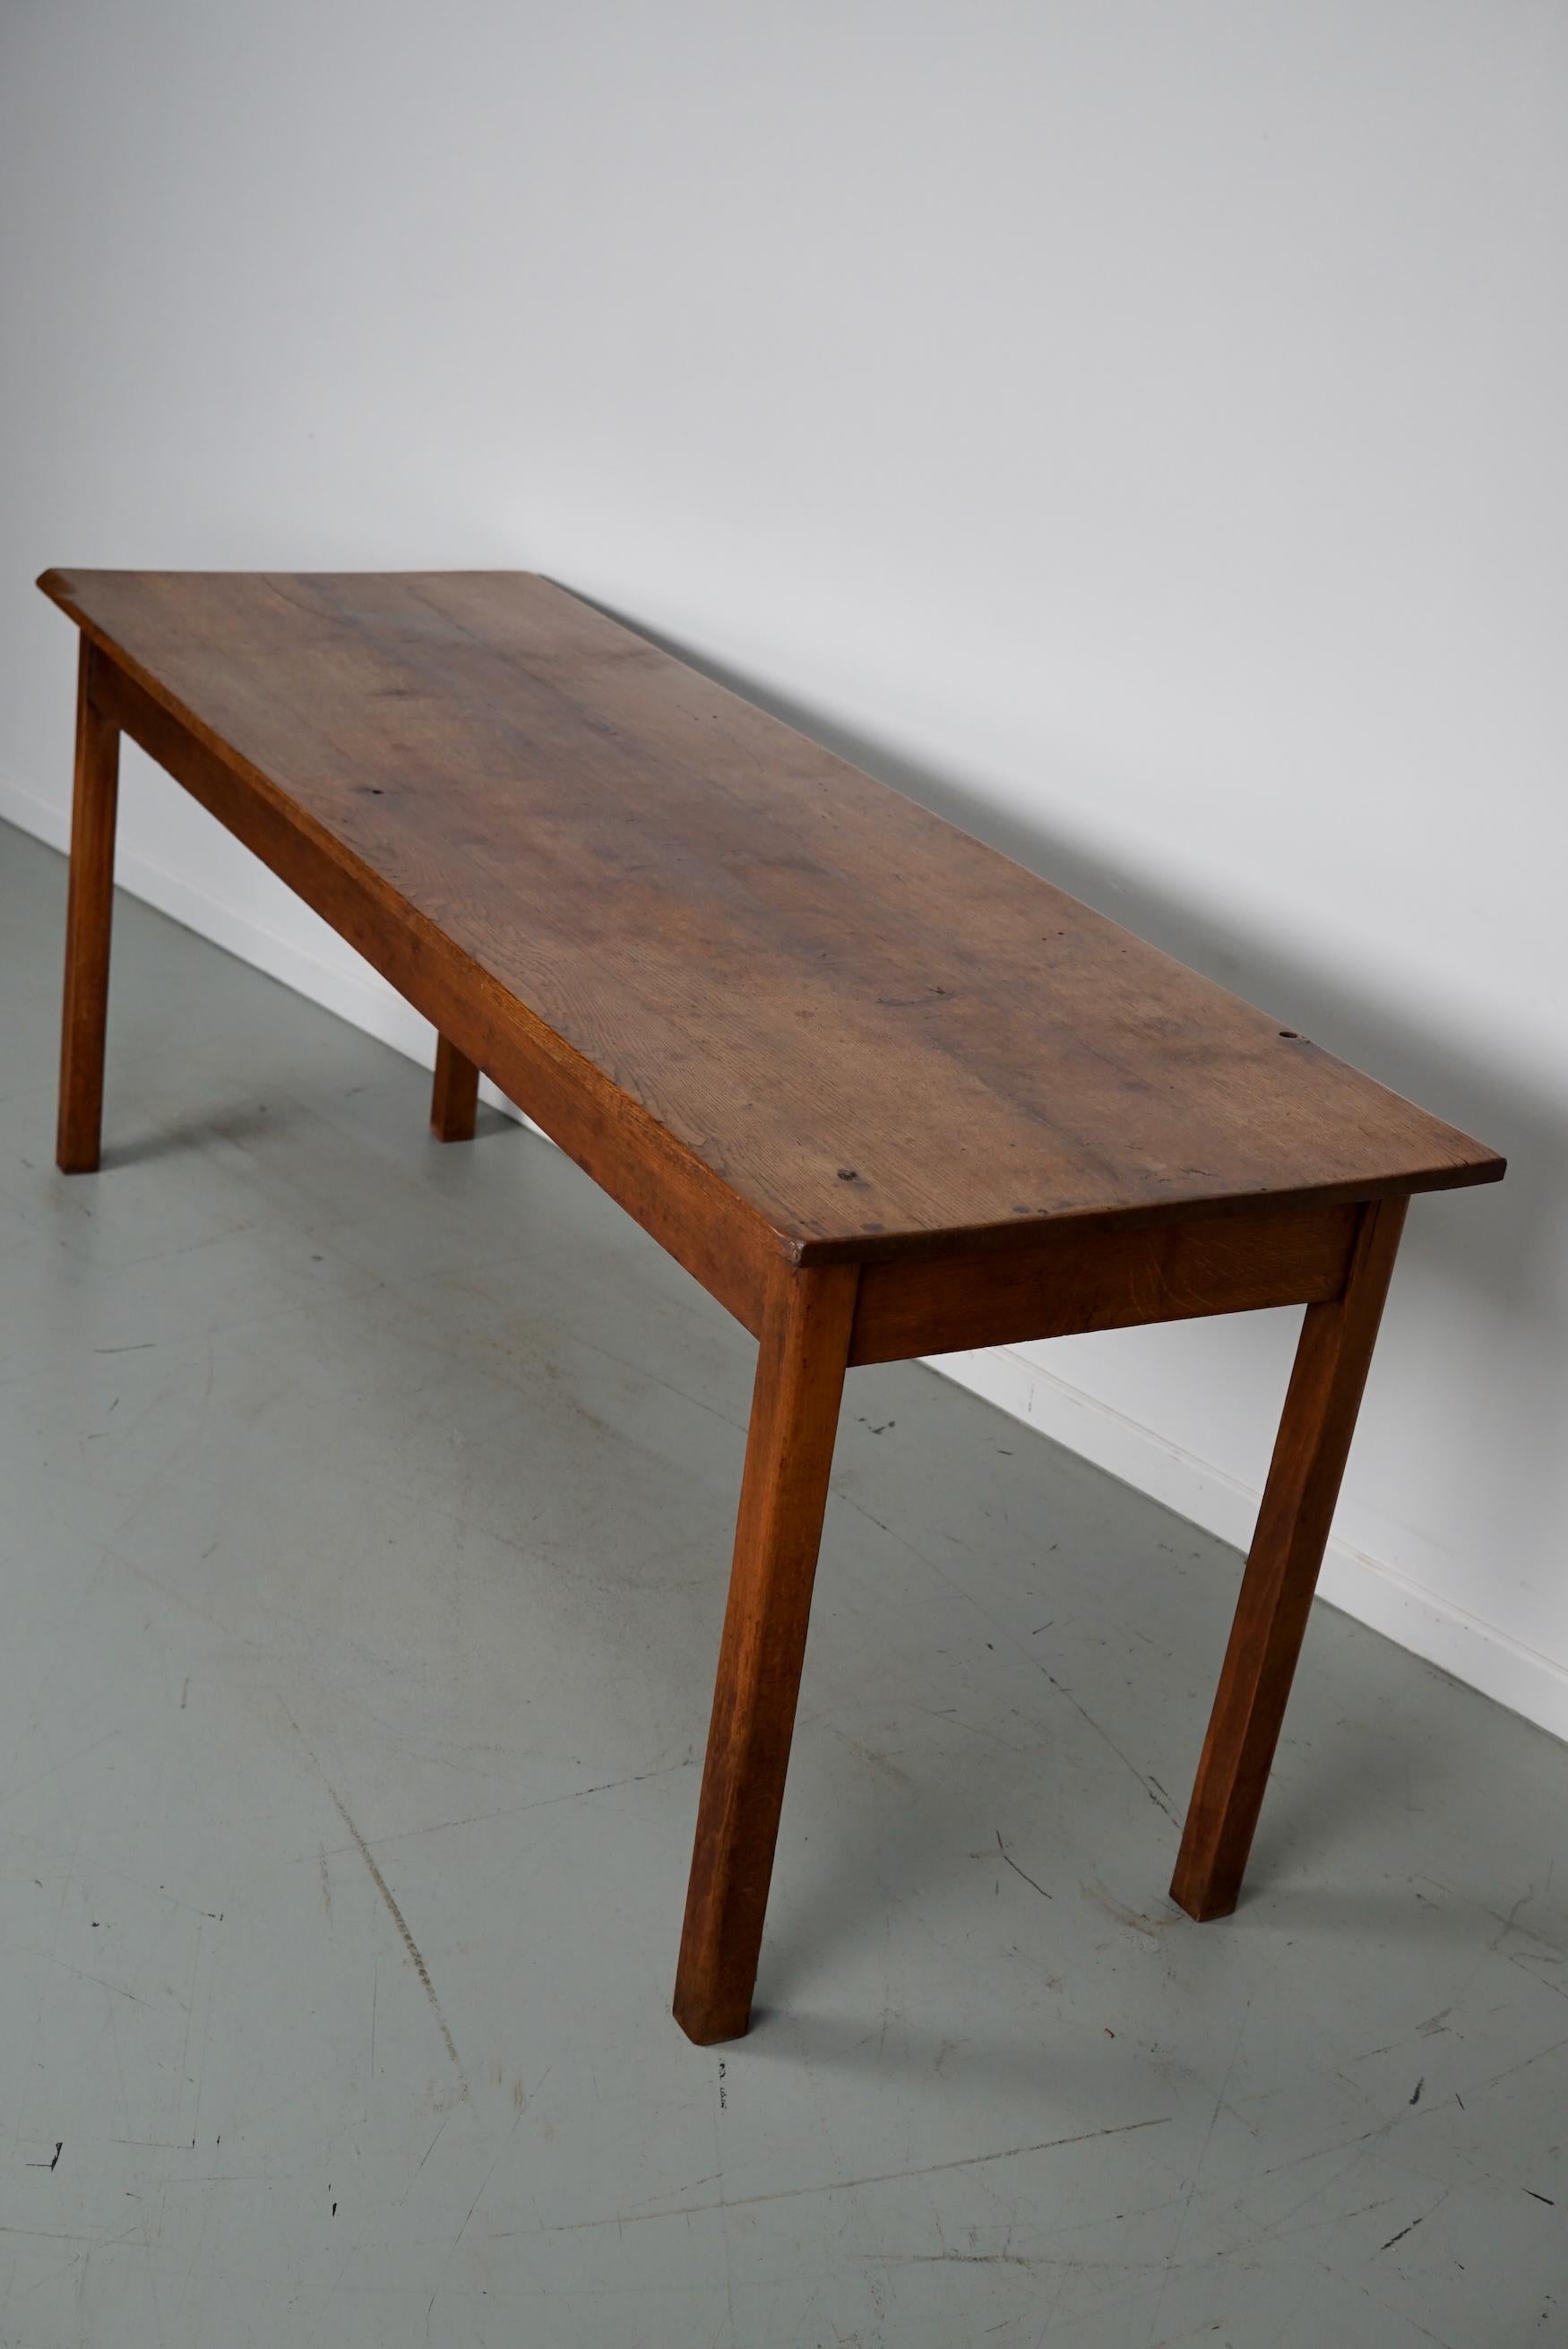 This table was made circa 1930s in the Netherlands and was used in a church until recently. It was made from solid oak and it retained a nice and warm patina and color over the years. The knee height is 63.5 cm.